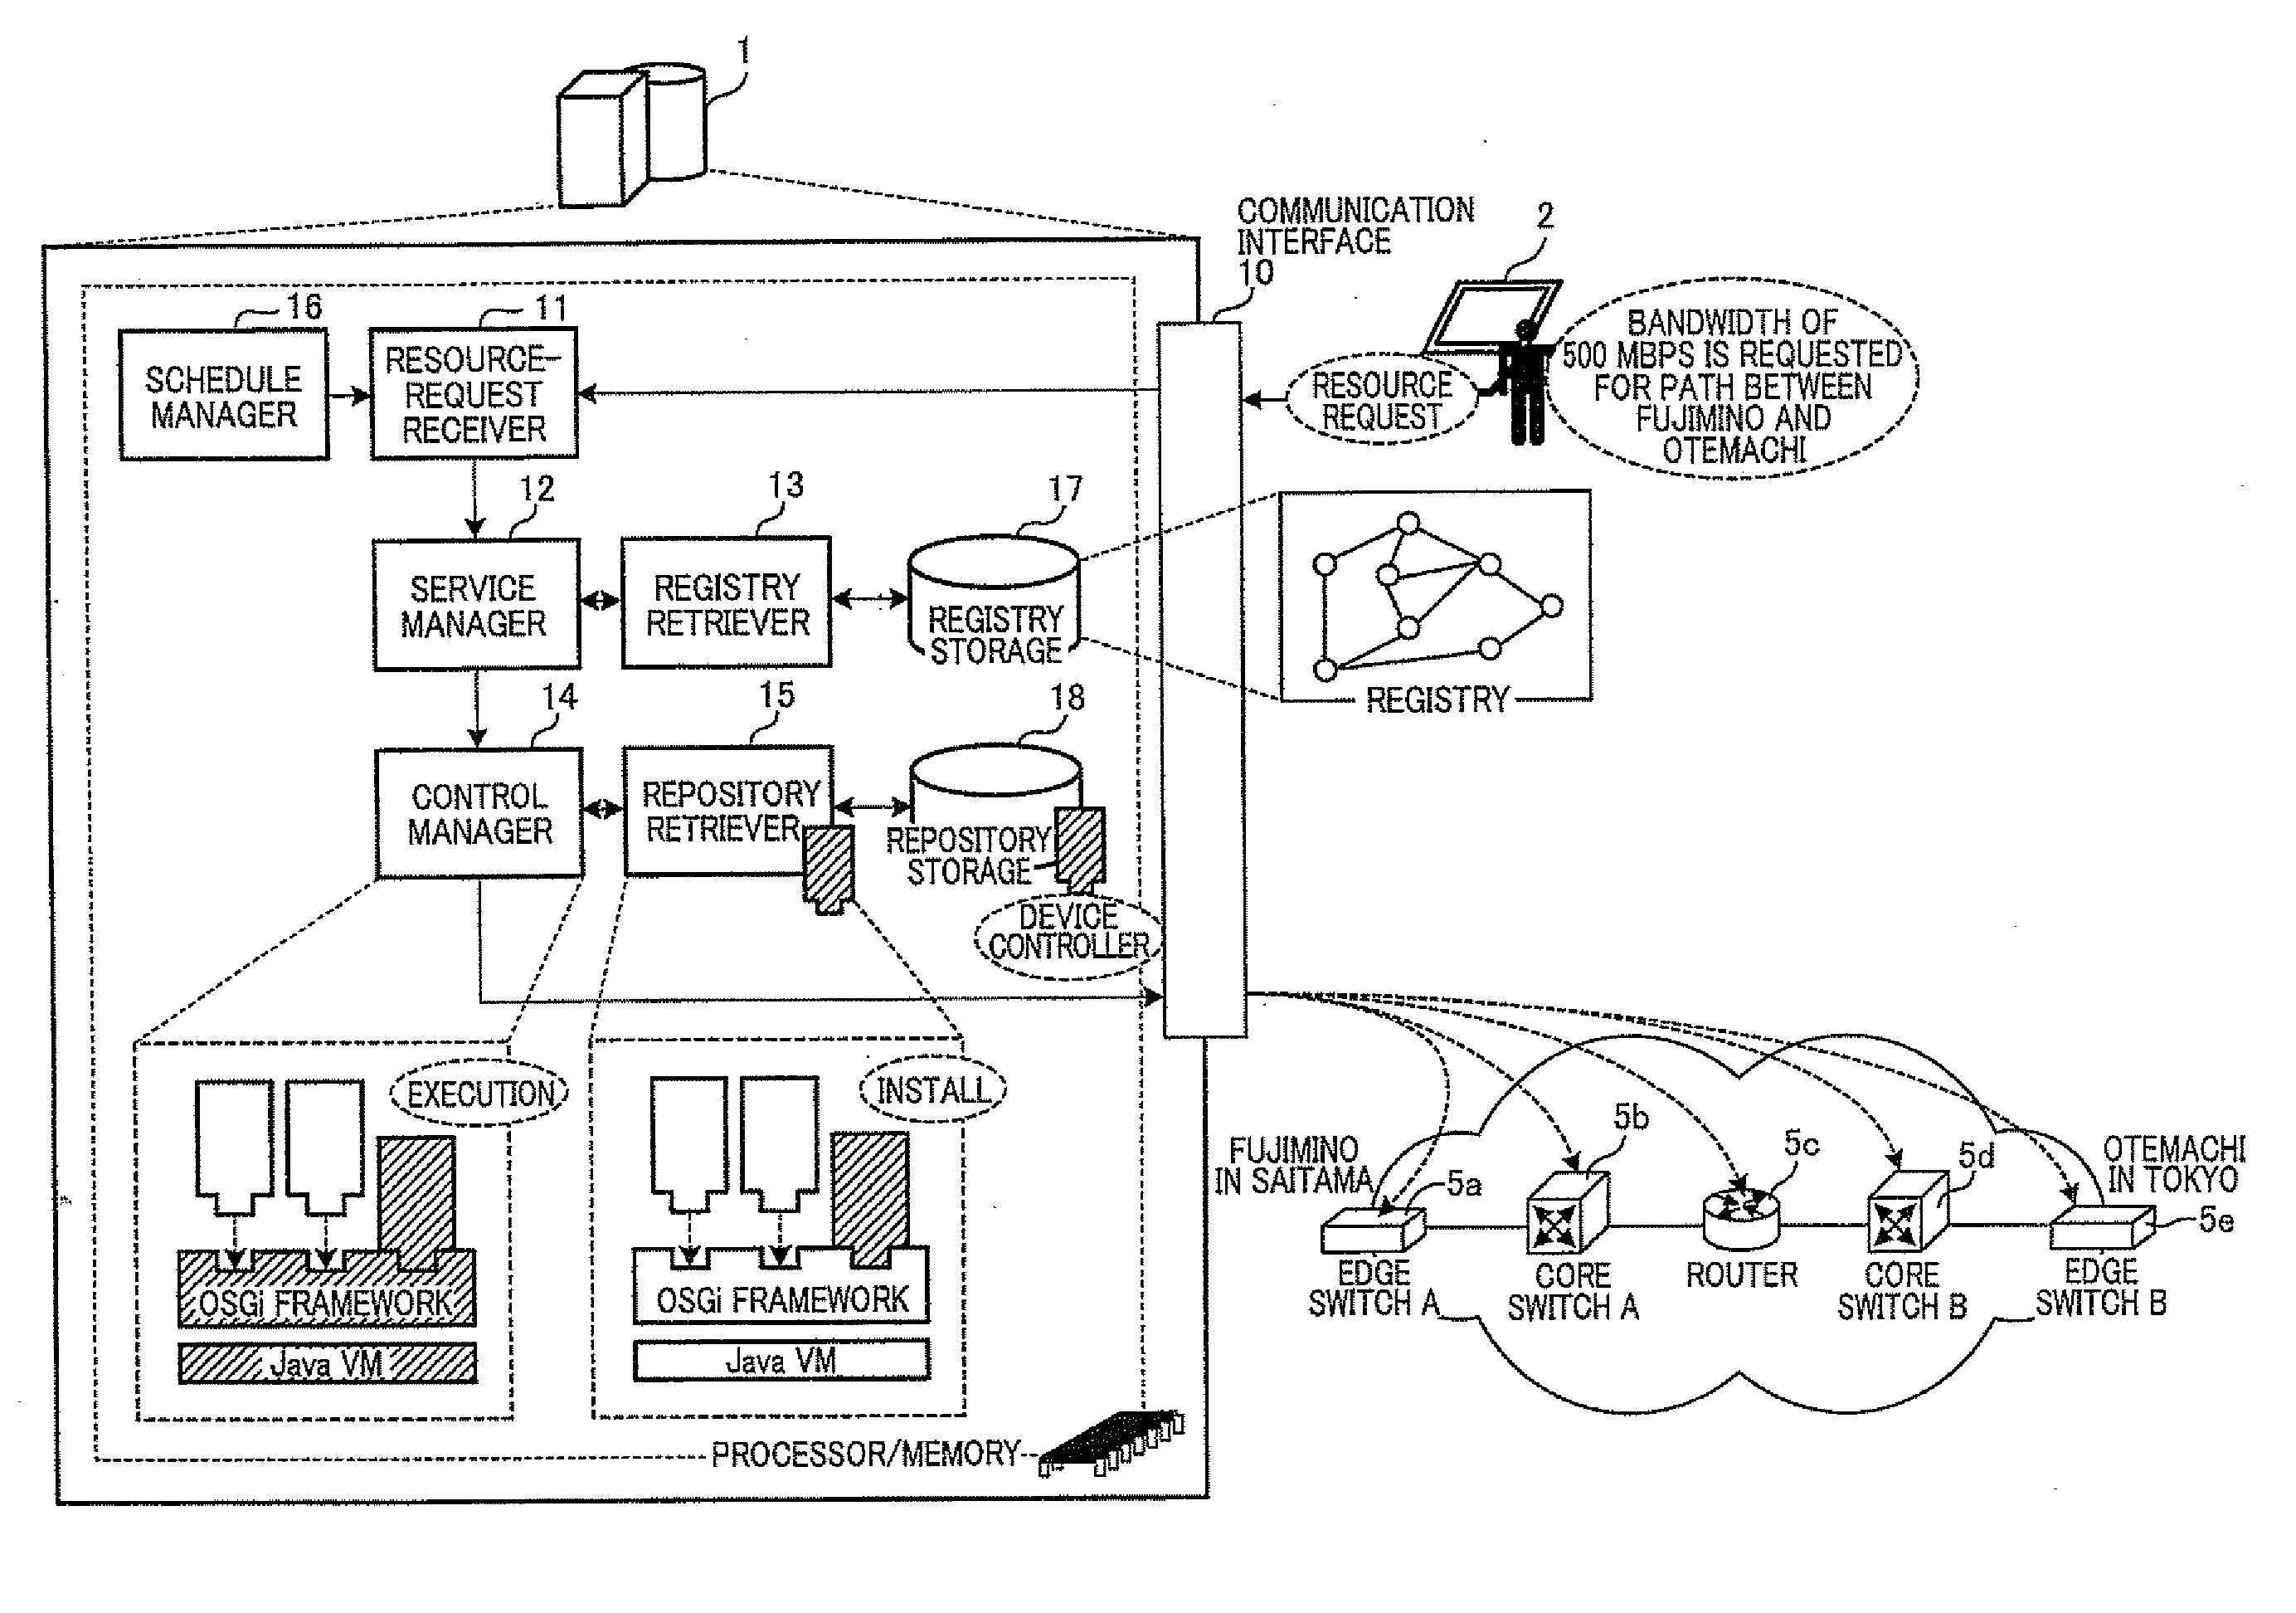 Apparatus and method for controlling devices in requested resource via network